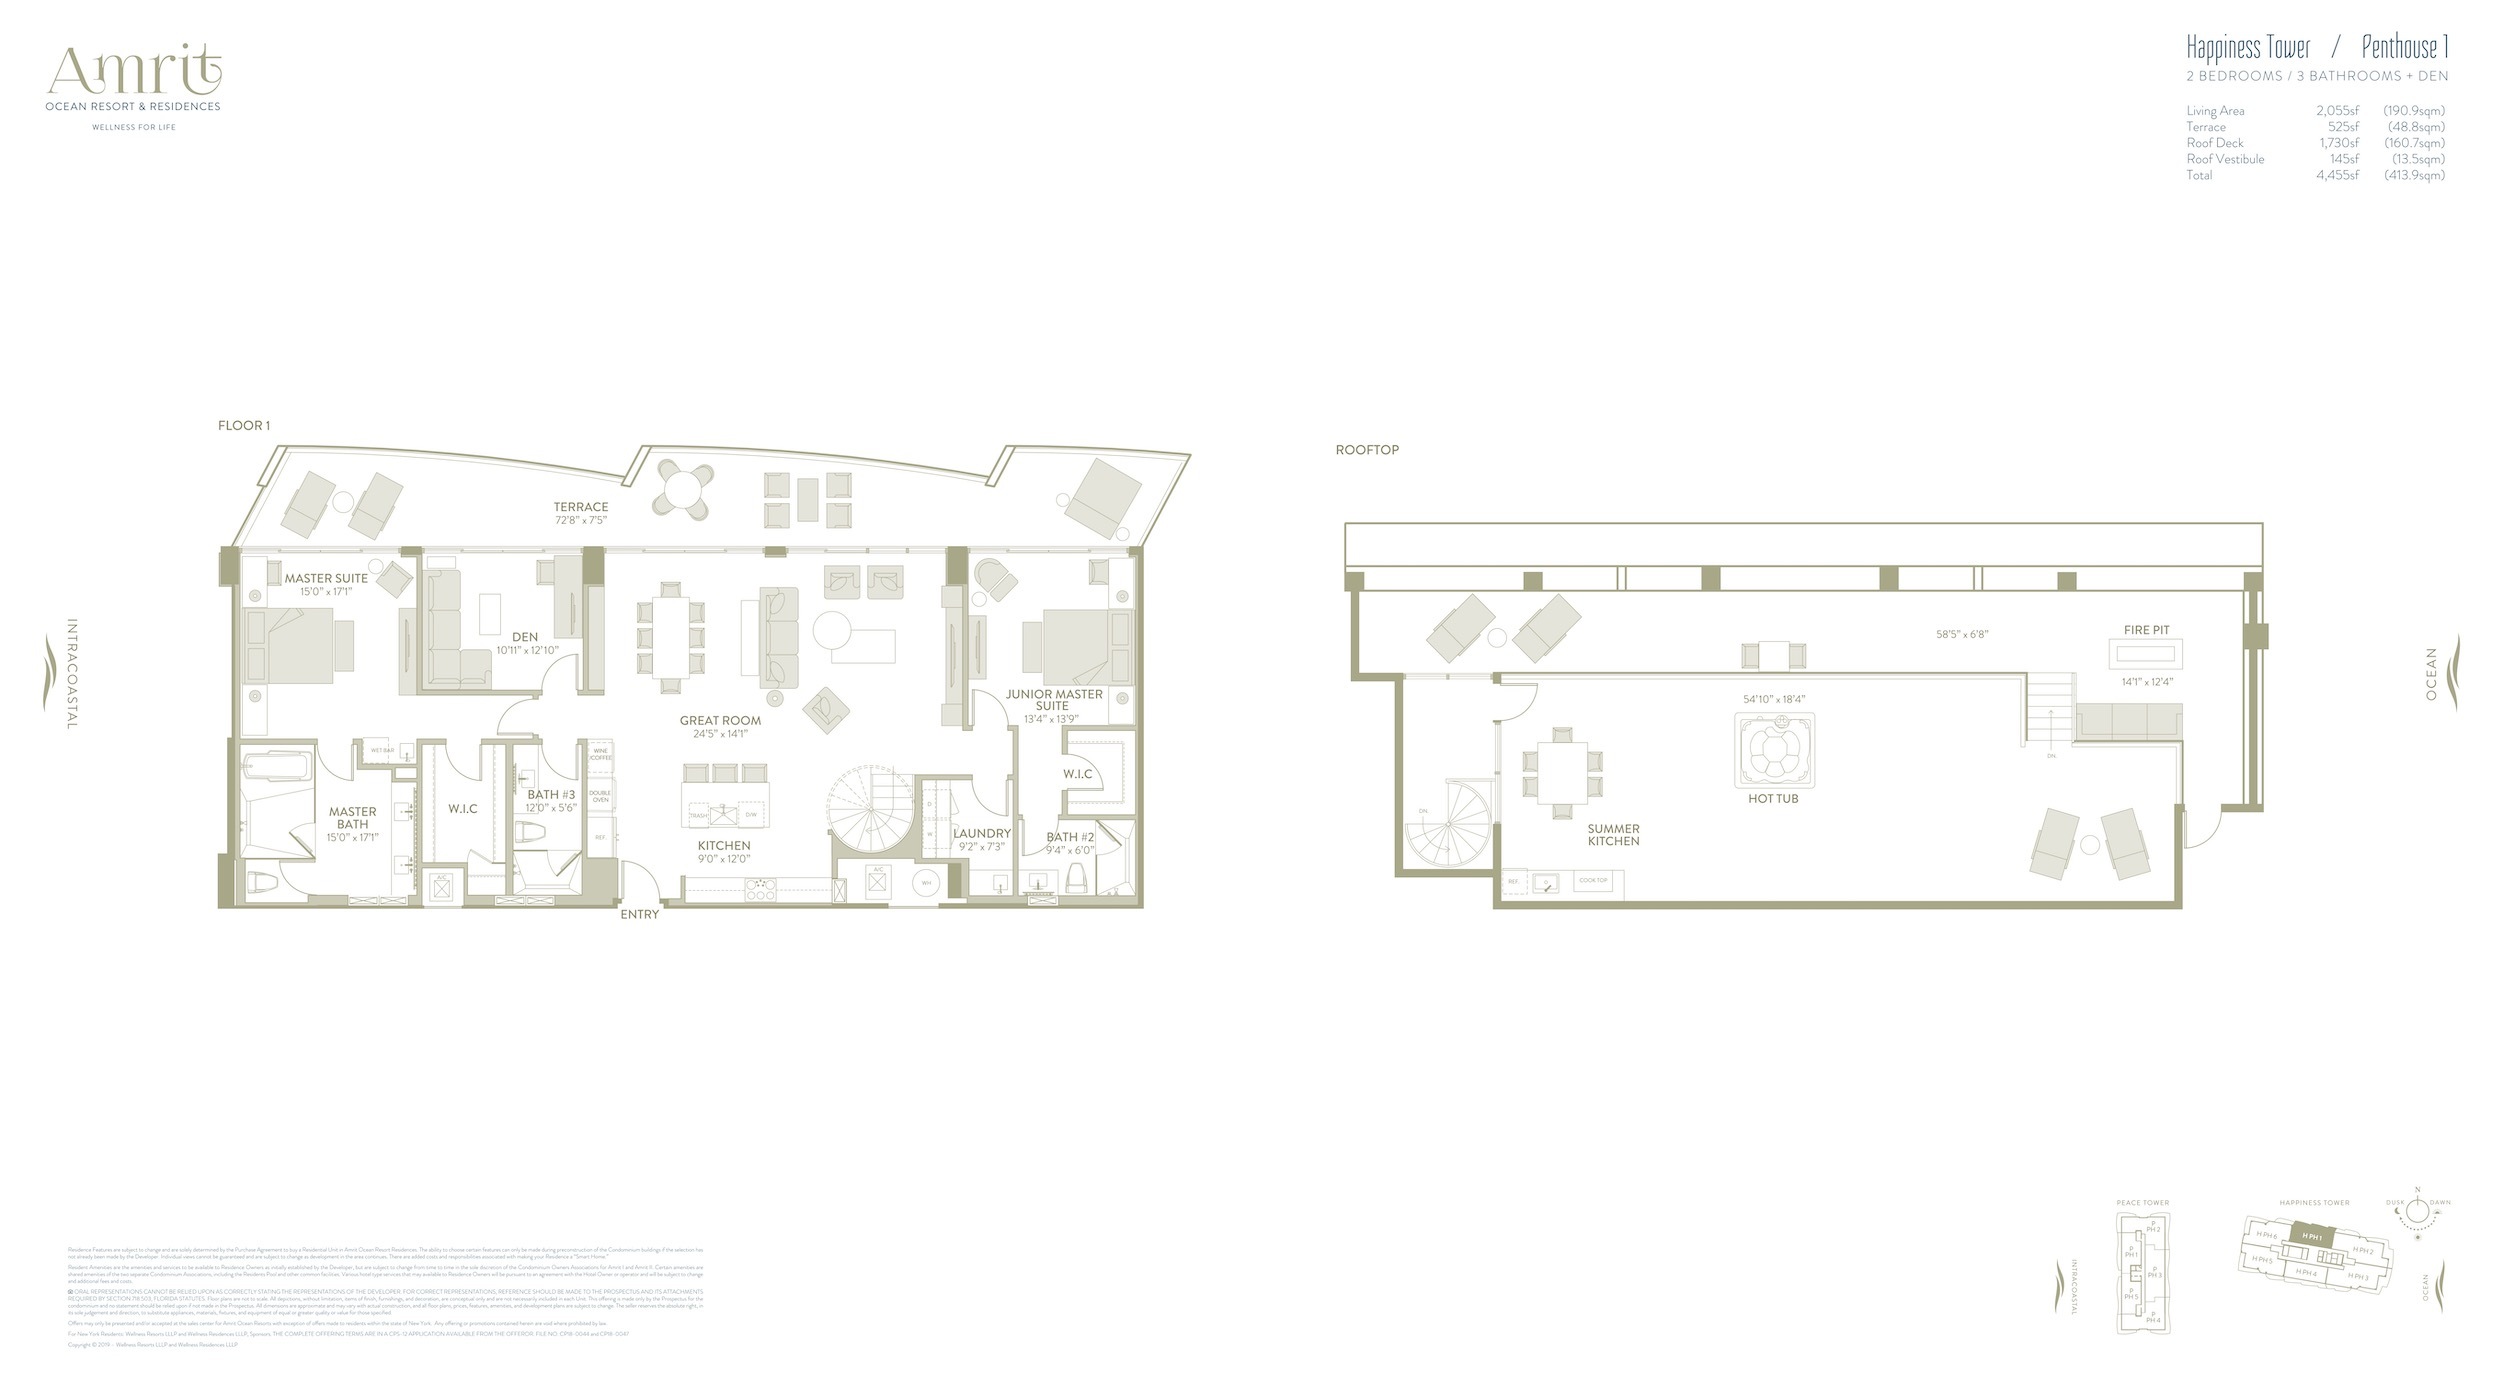 Floor Plan for Amrit Floorplans, Happiness Tower Penthouse 1